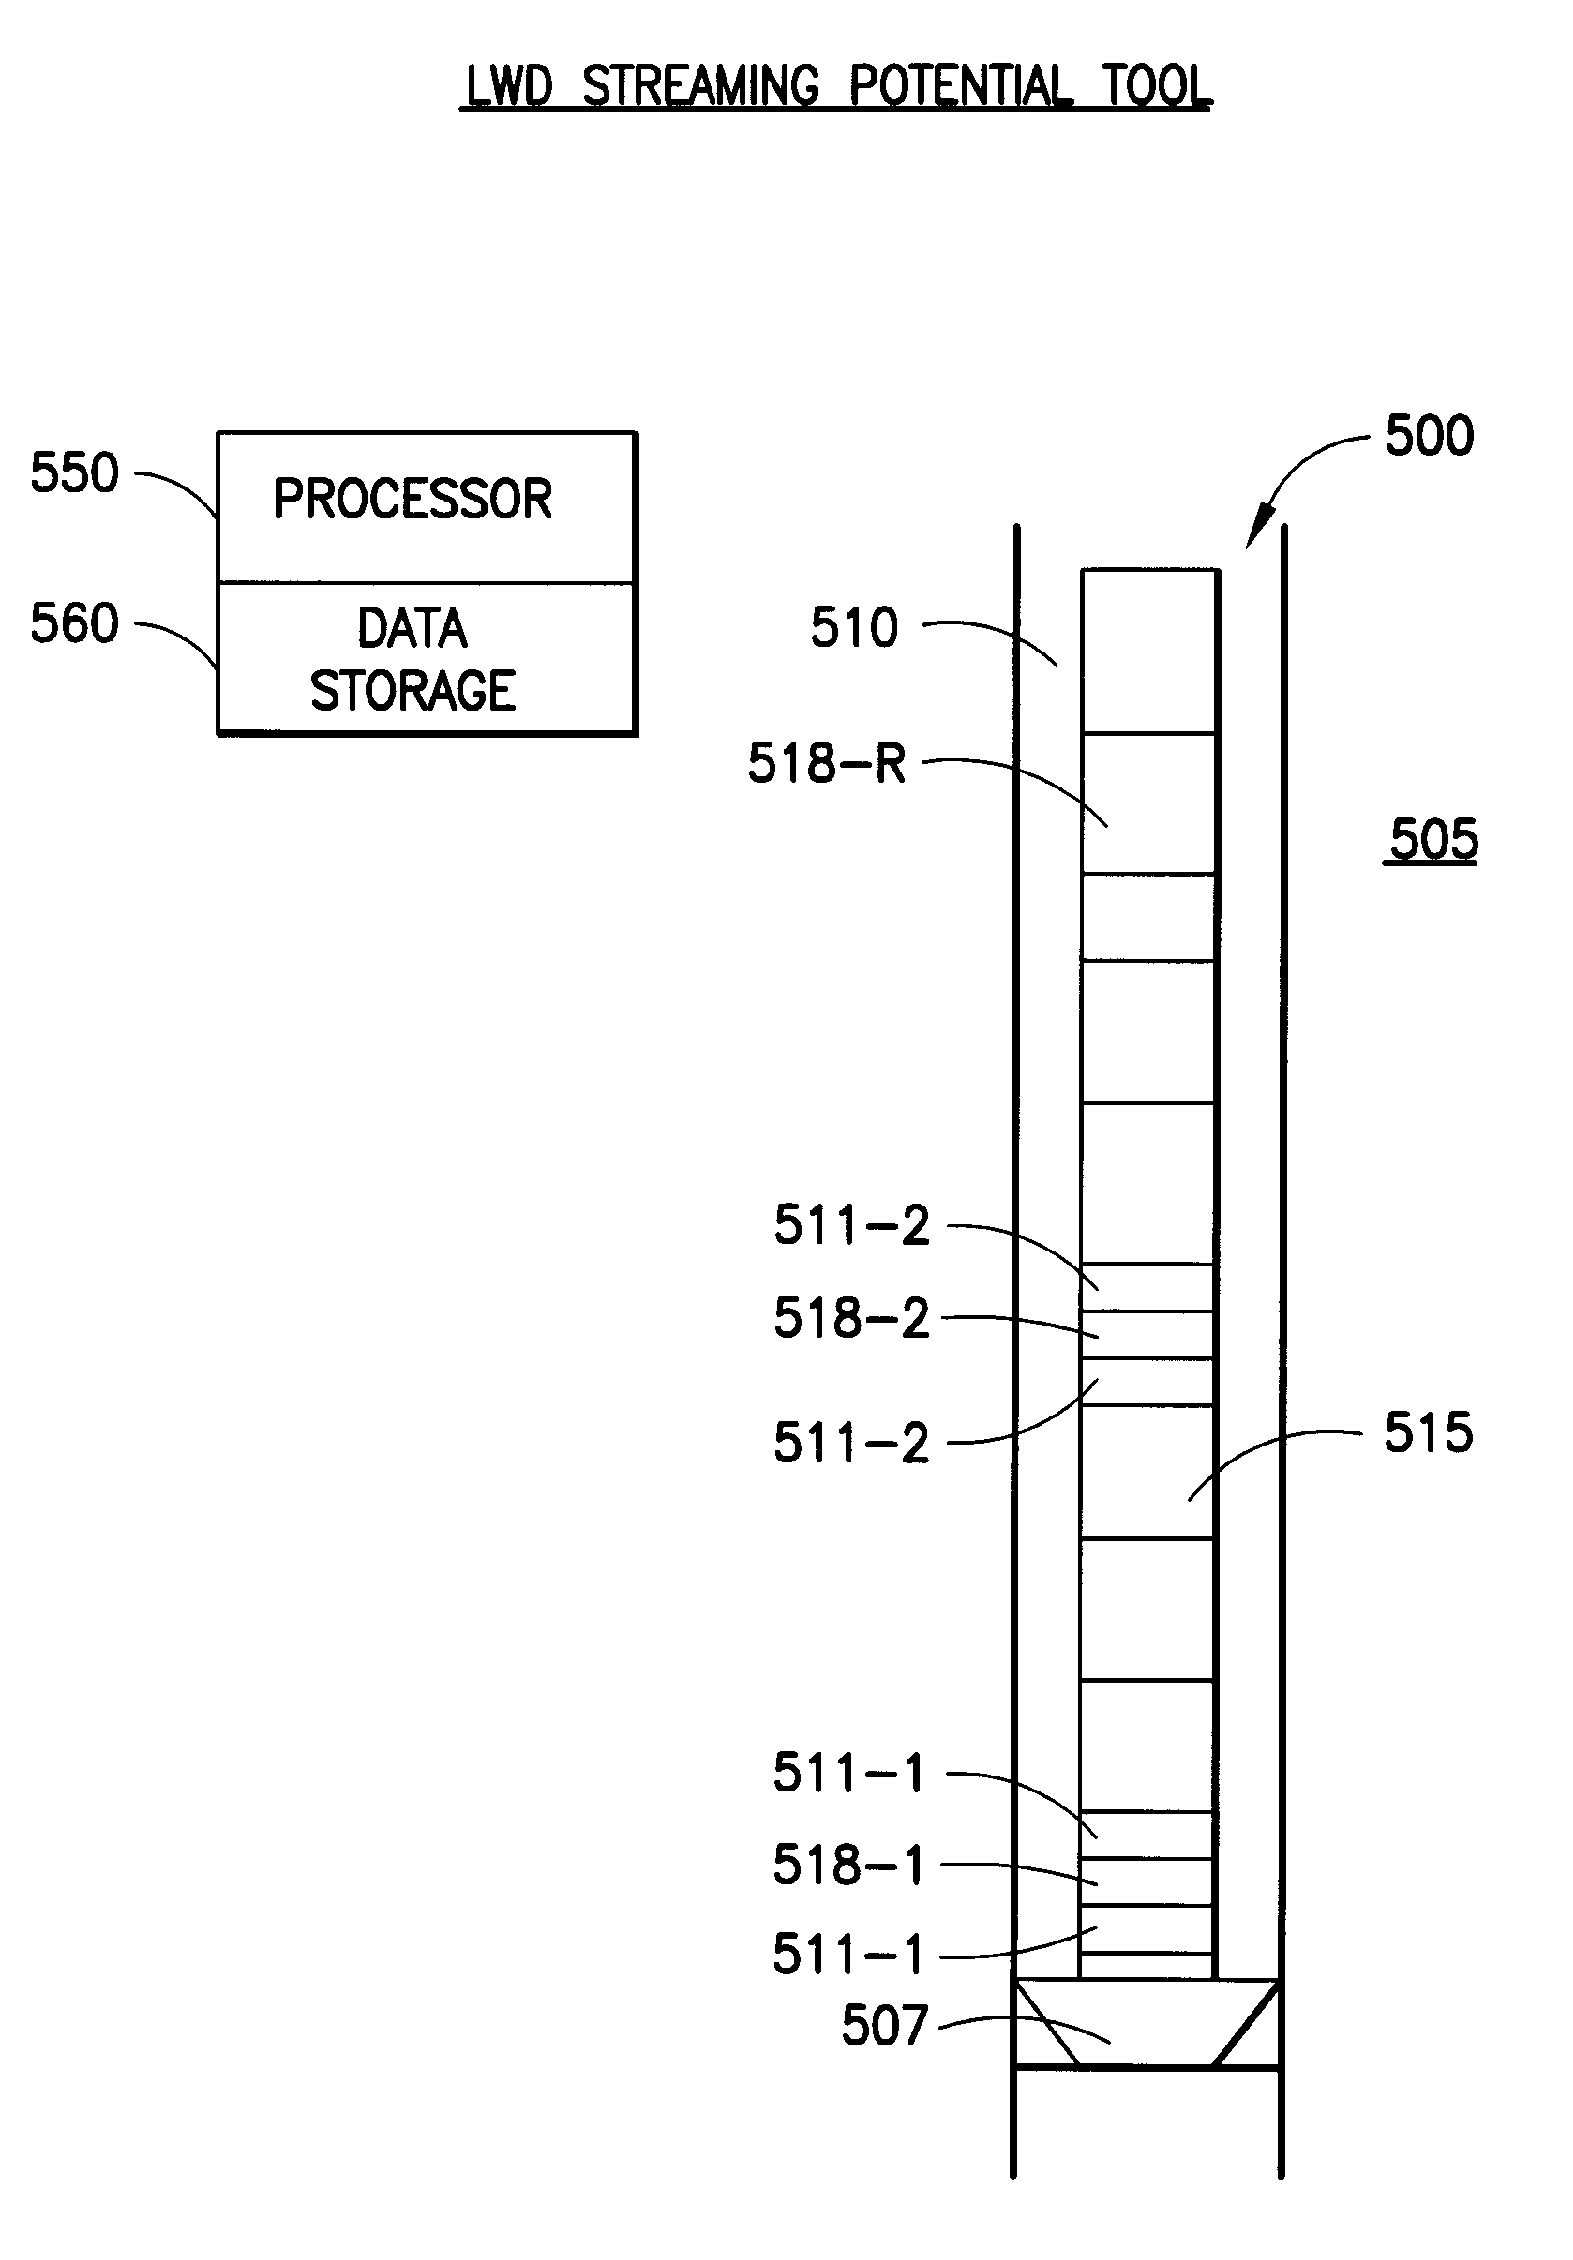 Apparatus for measuring streaming potentials and determining earth formation characteristics